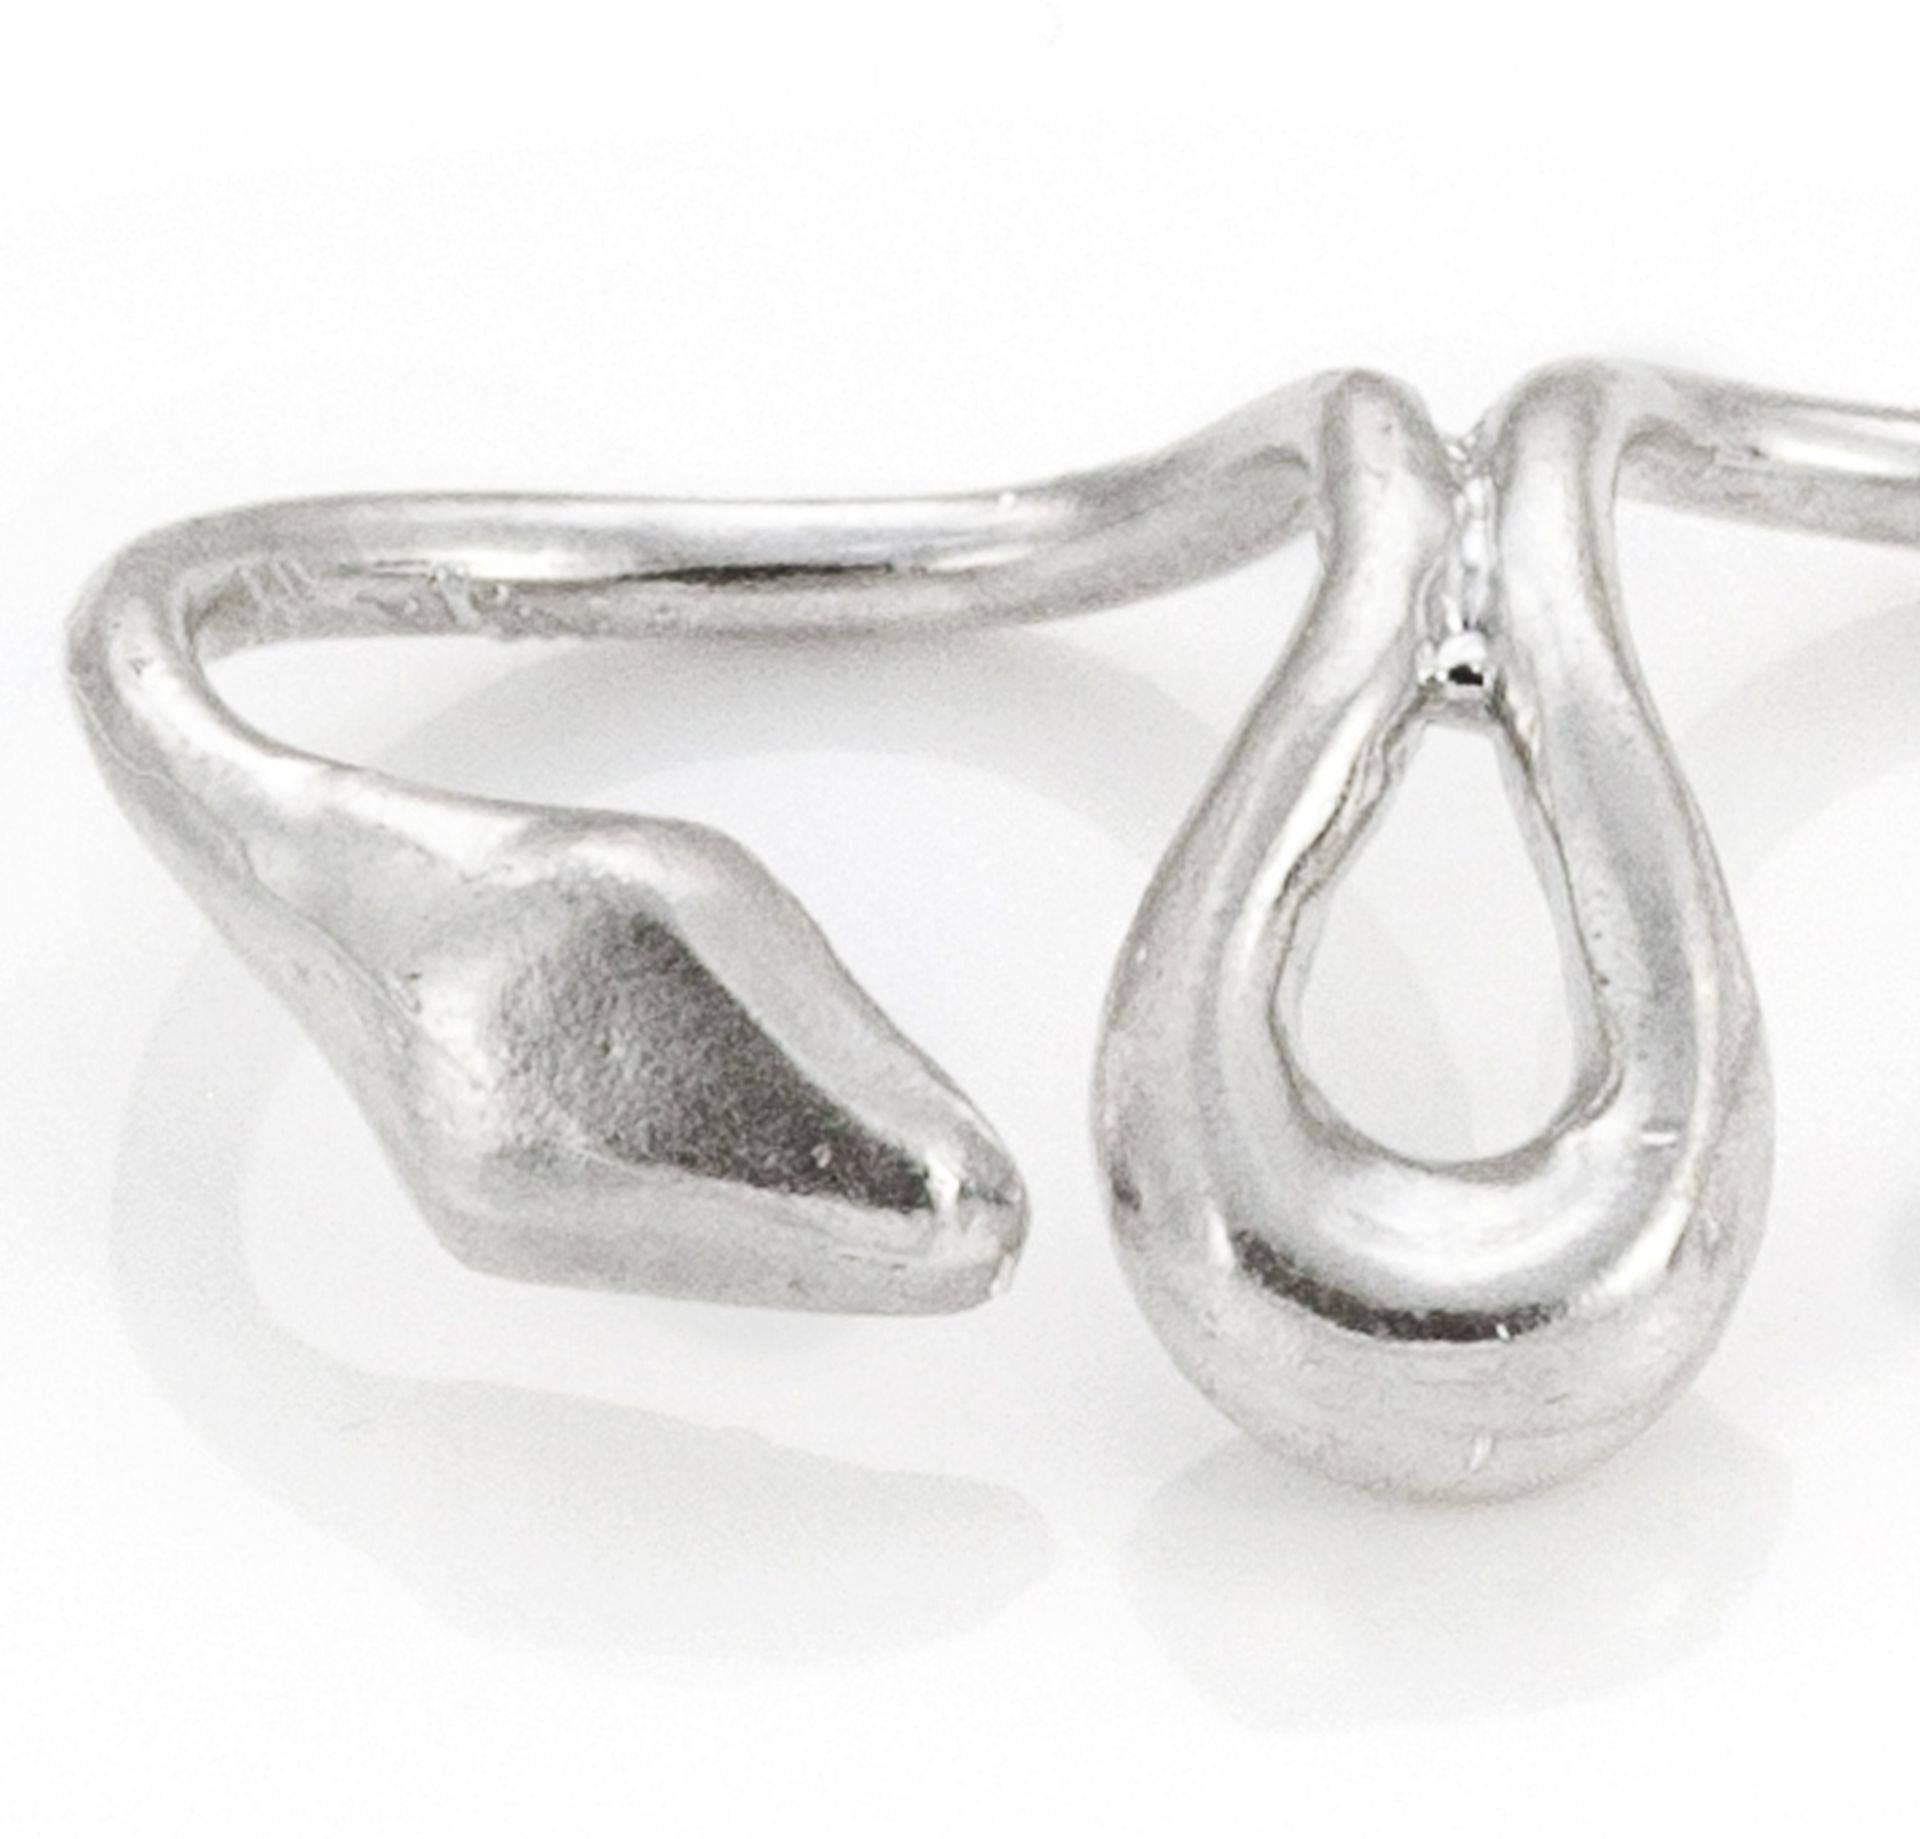 Giulia Barela' s Silver Ribbon ring

A snake gets comfortable between a few fingers, hold on tight creating a bond of strength.
  
Material: 925 Silver
